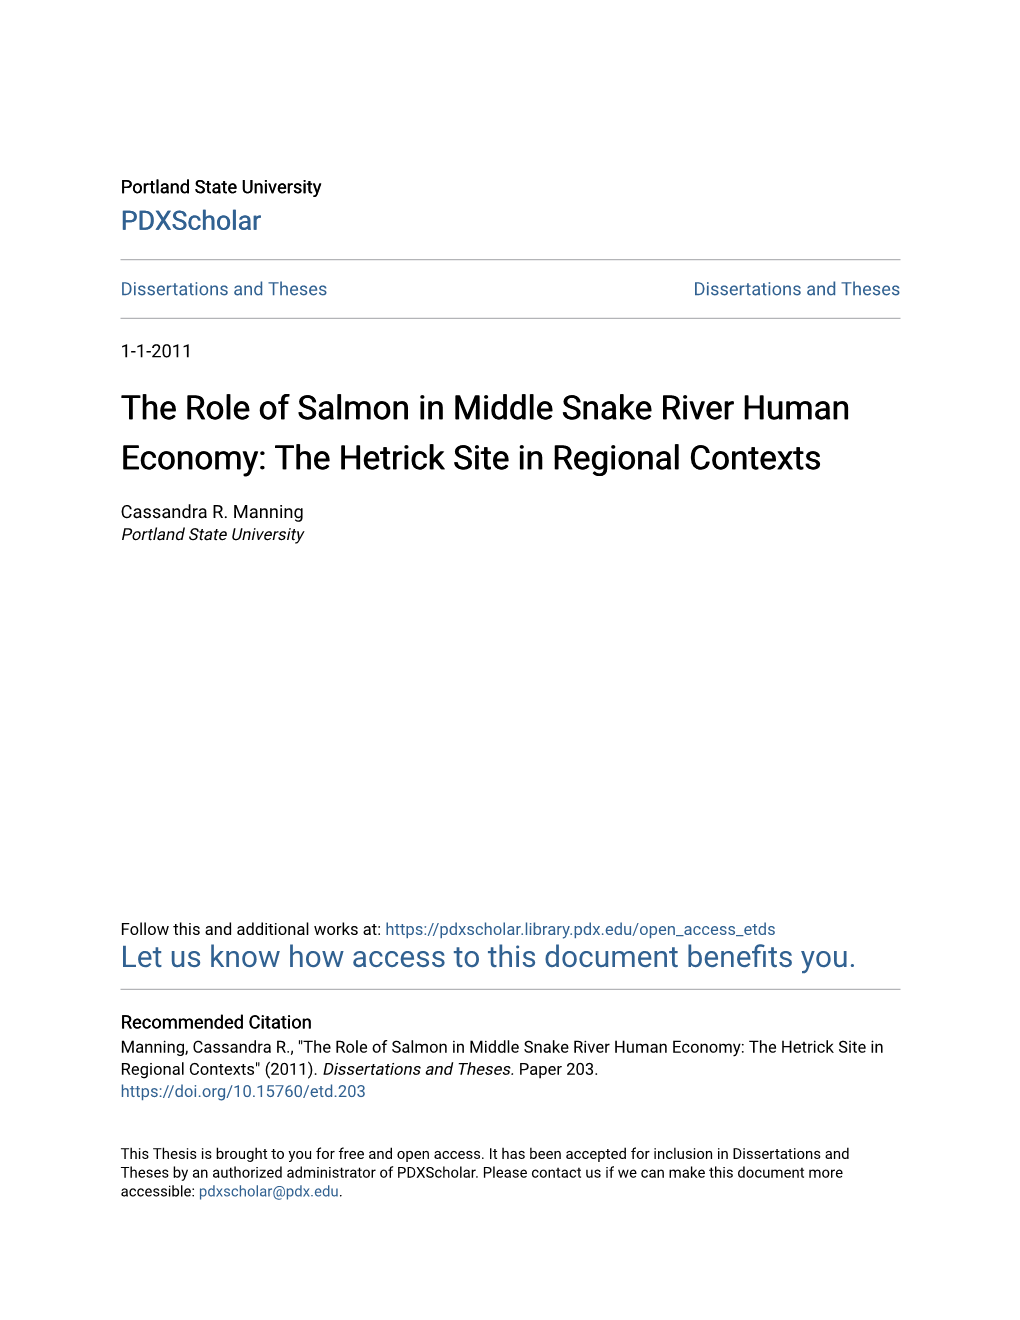 The Role of Salmon in Middle Snake River Human Economy: the Hetrick Site in Regional Contexts